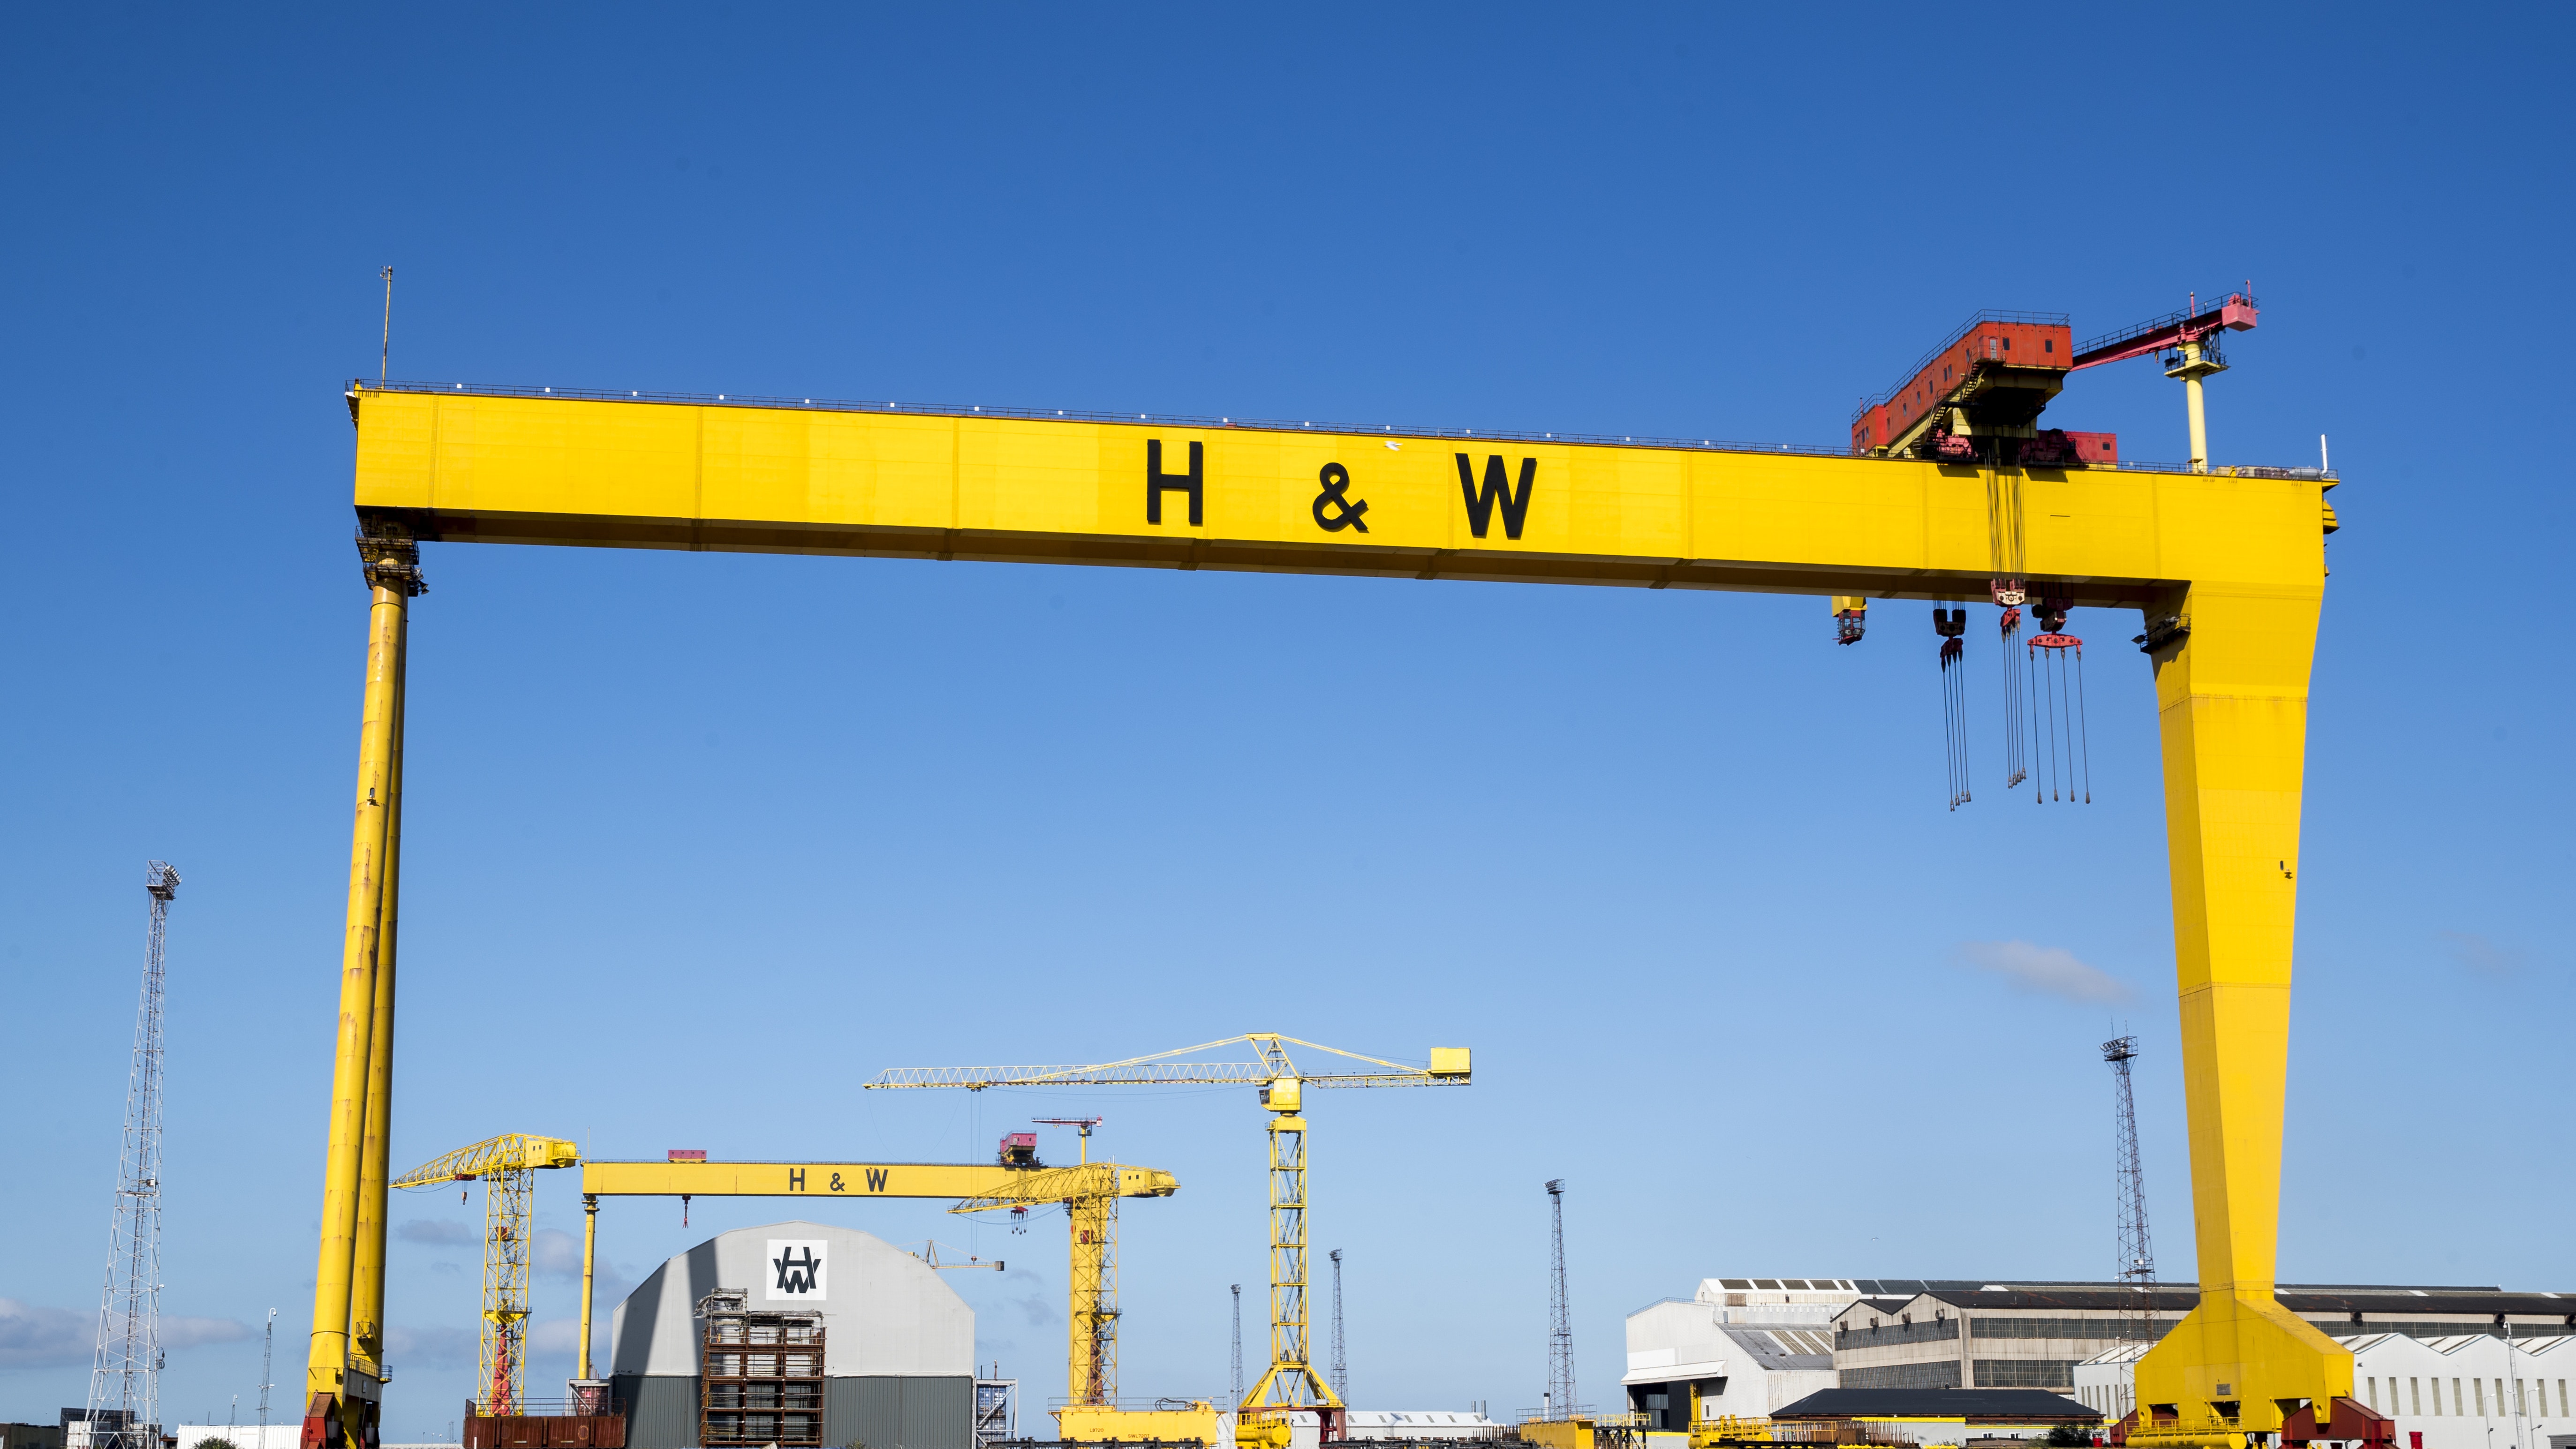 Harland and Wolff shipyard saved in £6m rescue deal